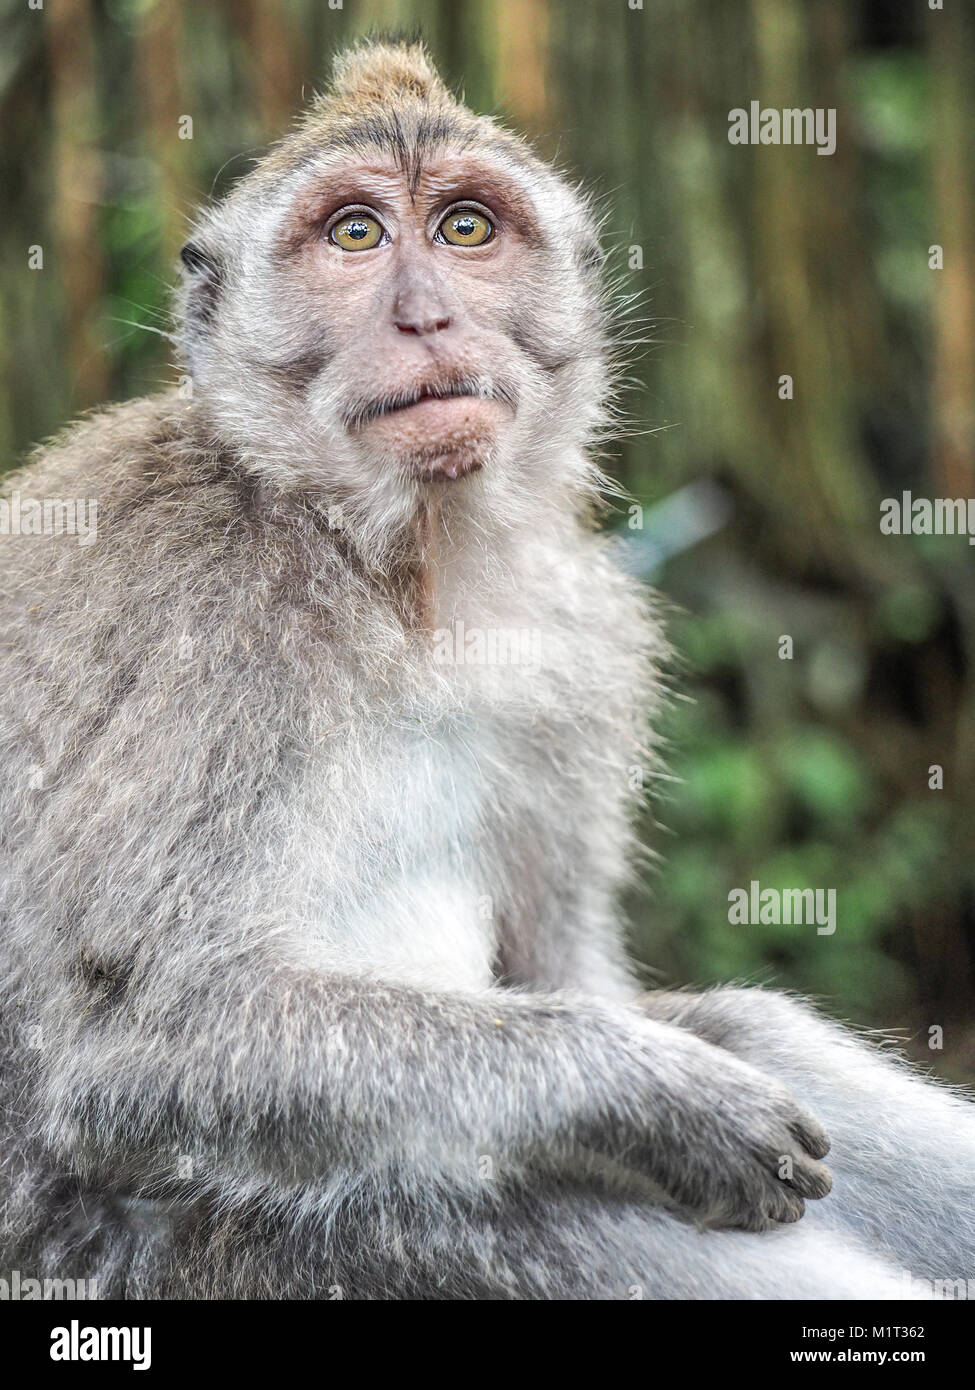 Facial expression of animal. Portrait of surprised and shocked monkey macaque Stock Photo